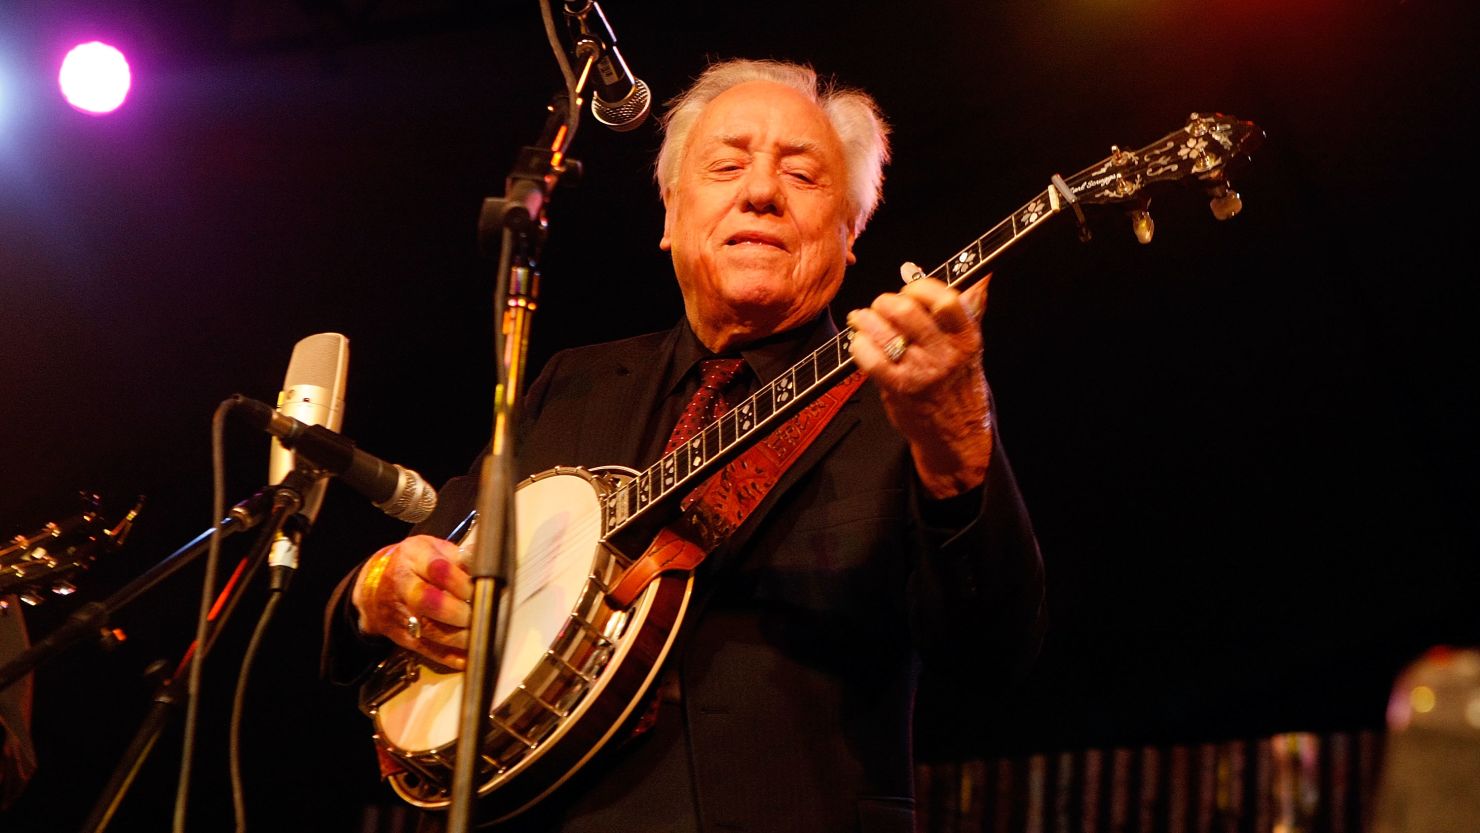 Bluegrass banjo legend Earl Scruggs has touched the lives of millions of professional and aspiring banjo players worldwide.